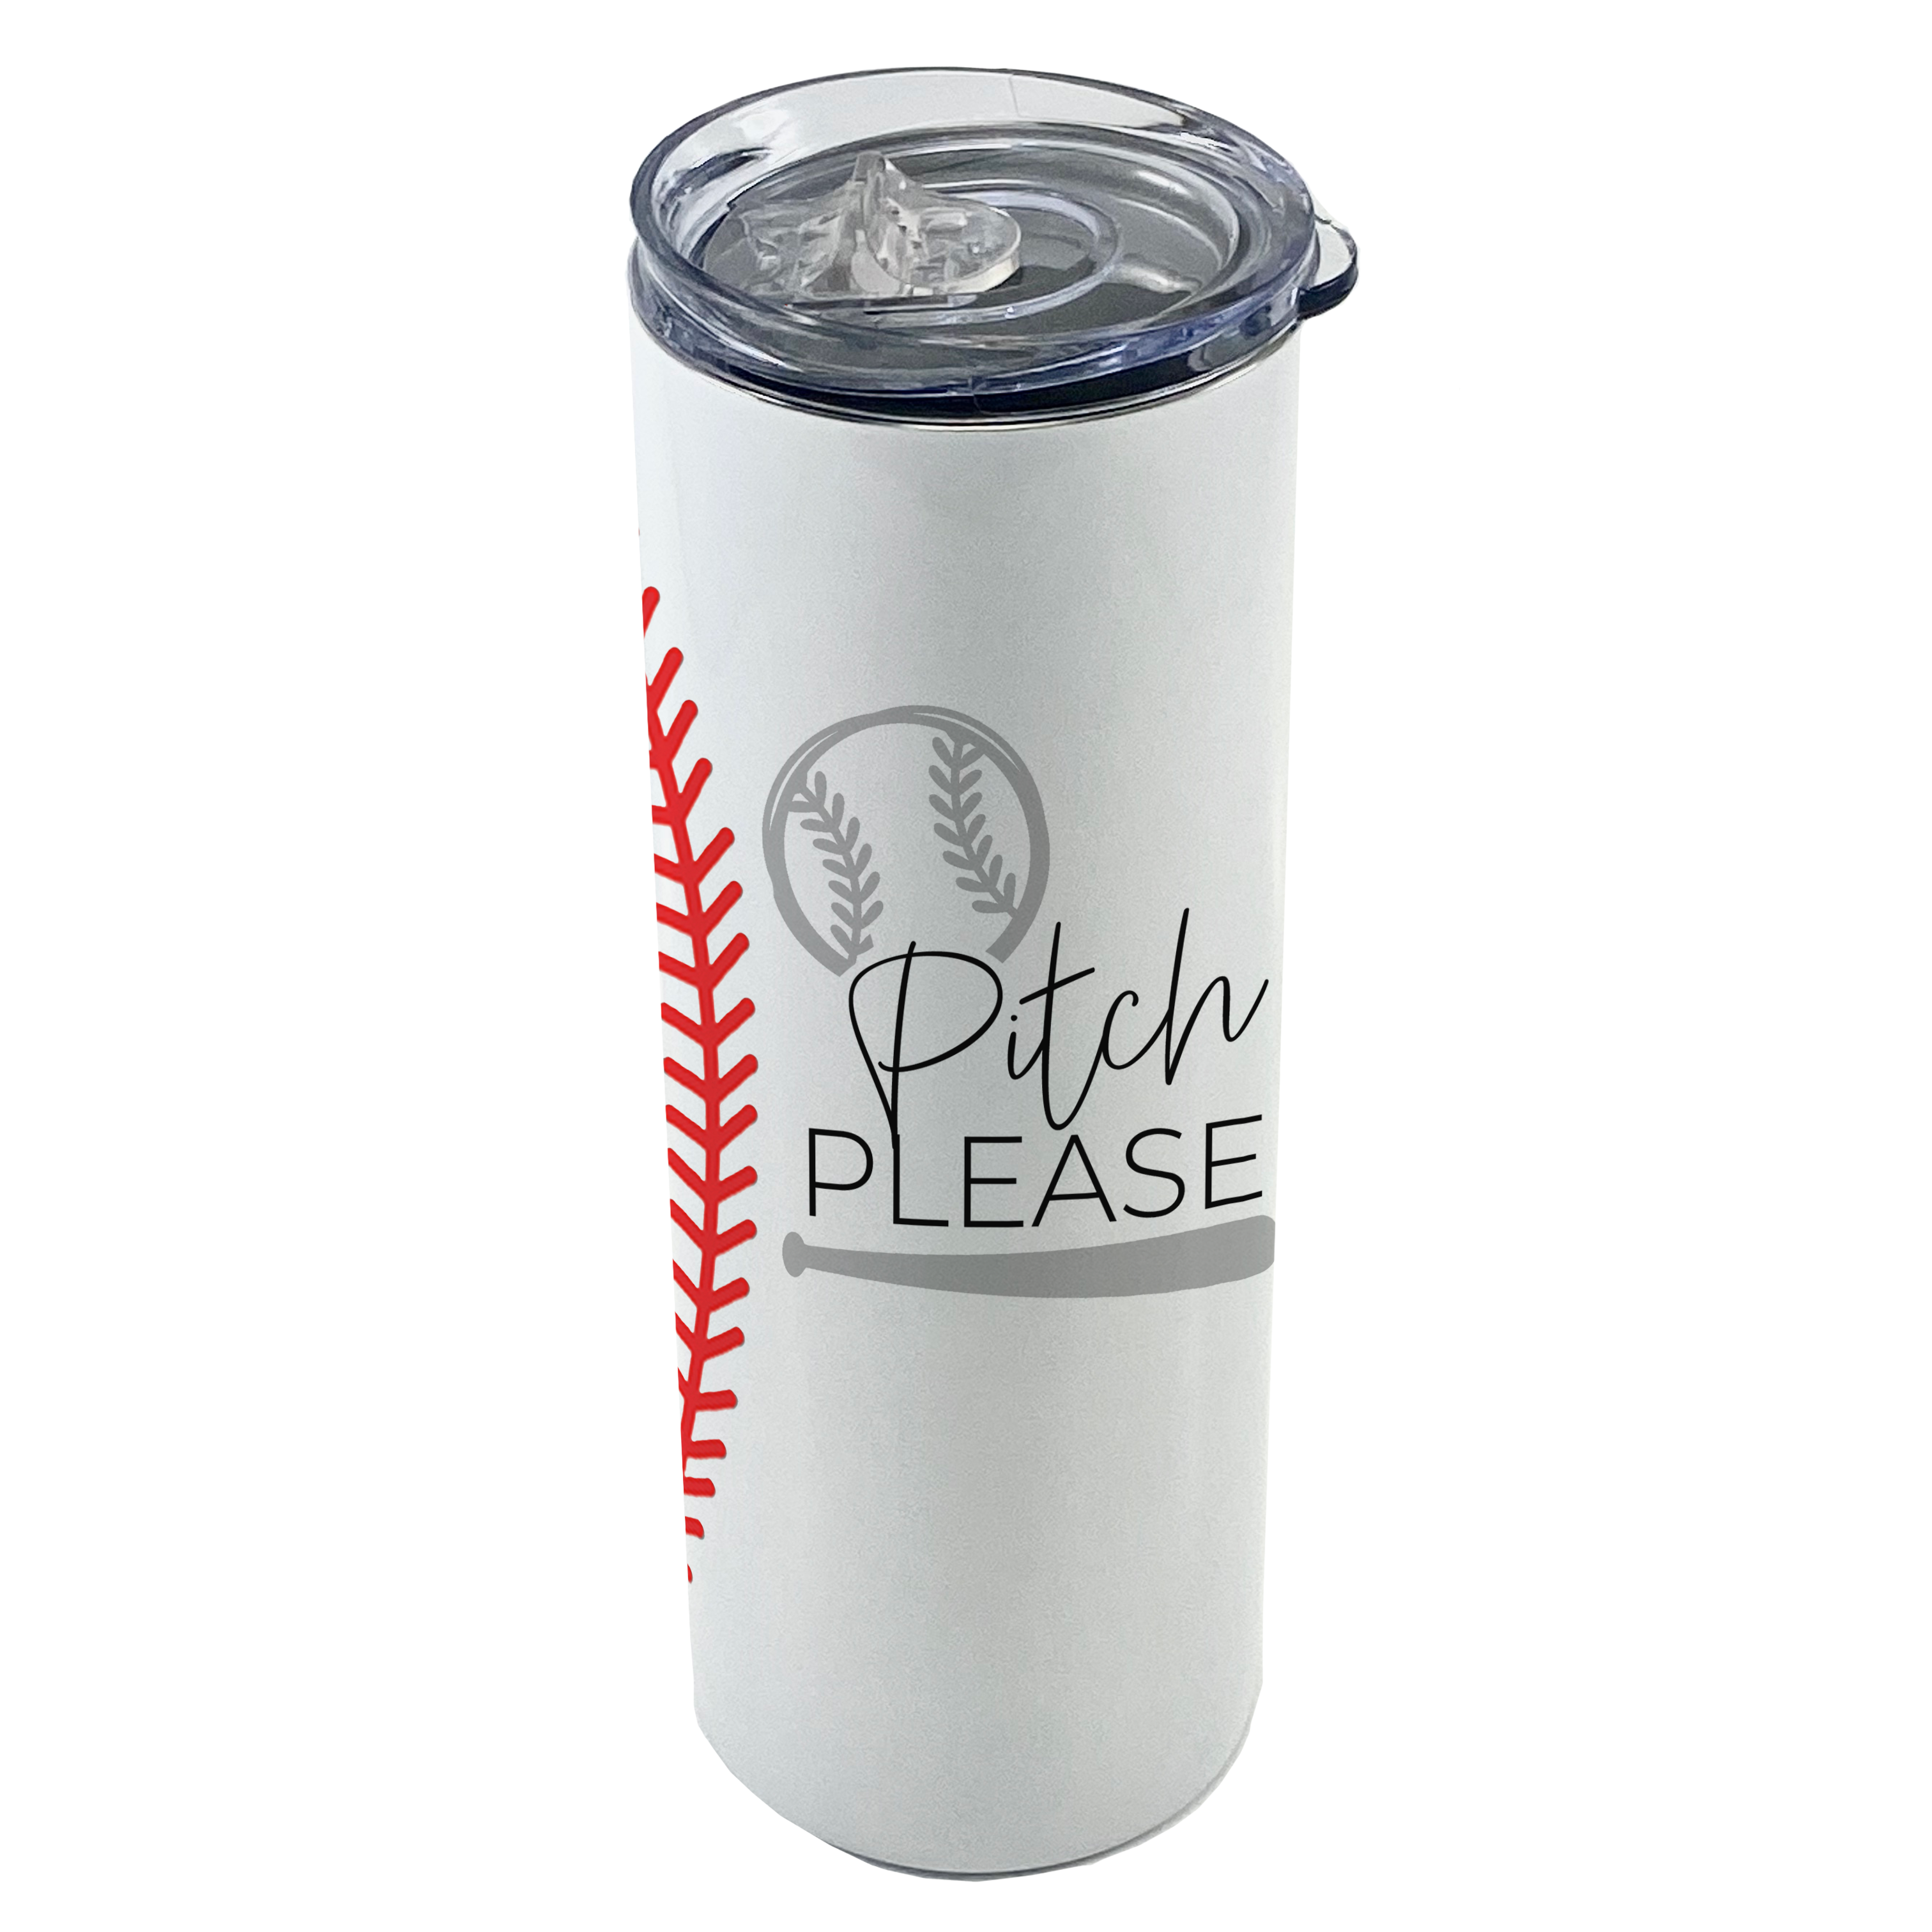 Sports Collection (Pitch Please - Baseball) 20 Oz Stainless Steel Travel Tumbler with Straw